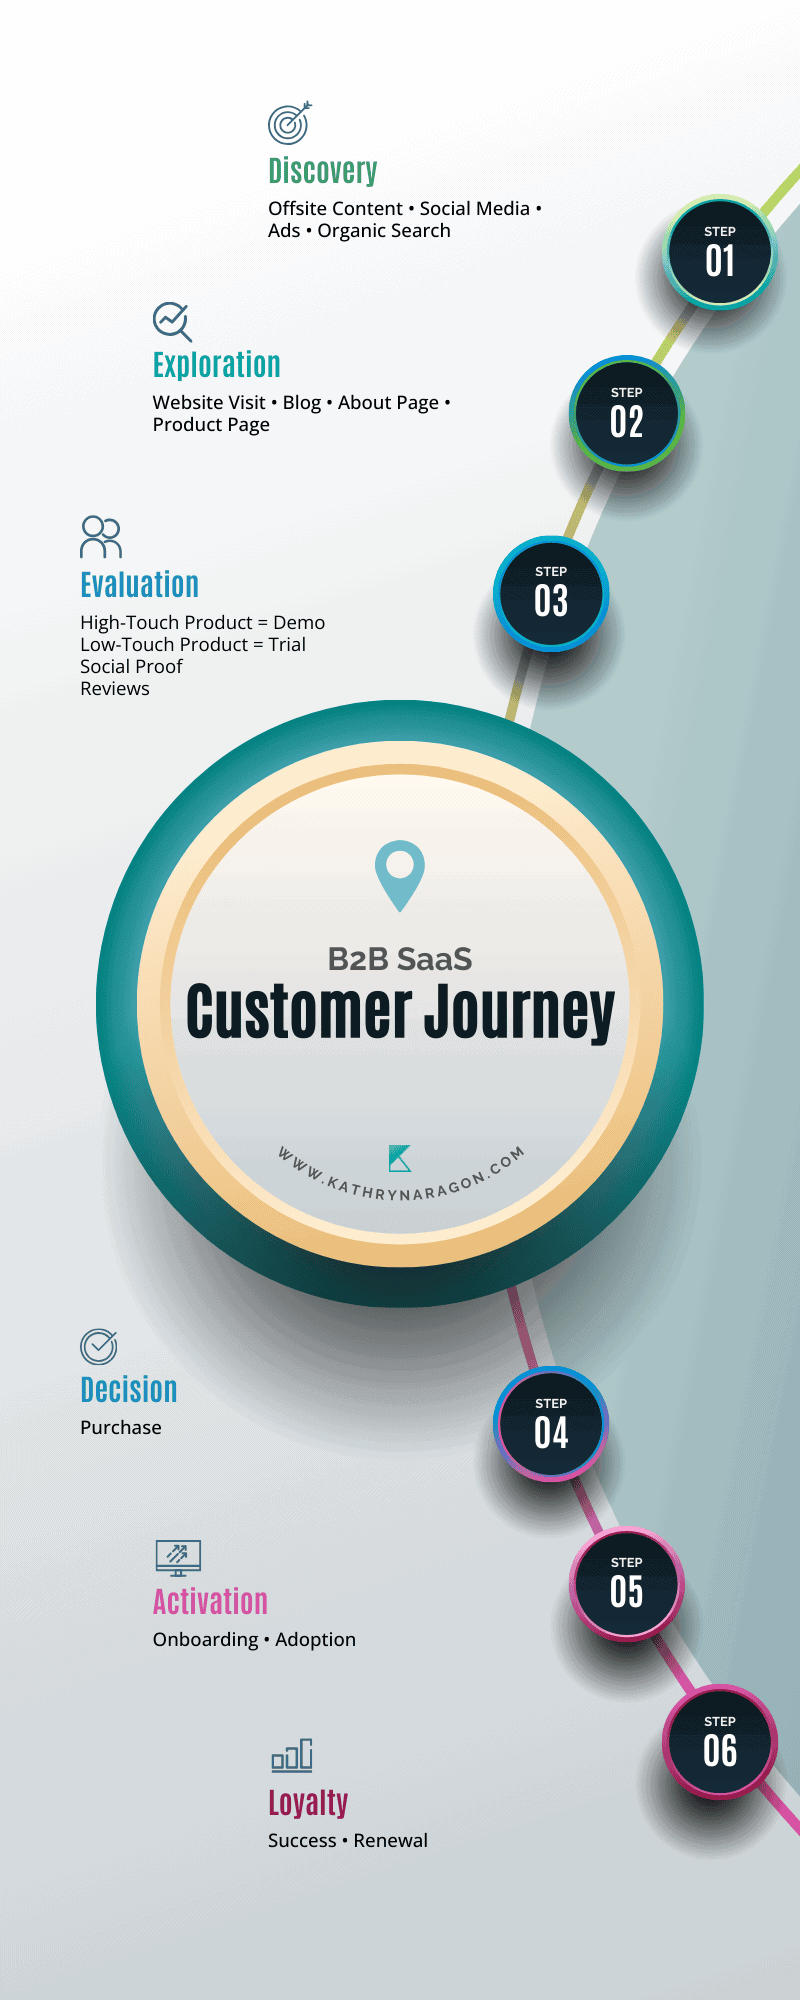 Infographic with the 6 stages of the B2B SaaS Customer Journey: discovery, exploration, evaluation, decision, activation, and loyalty. SaaS marketing should align with each of these stages.